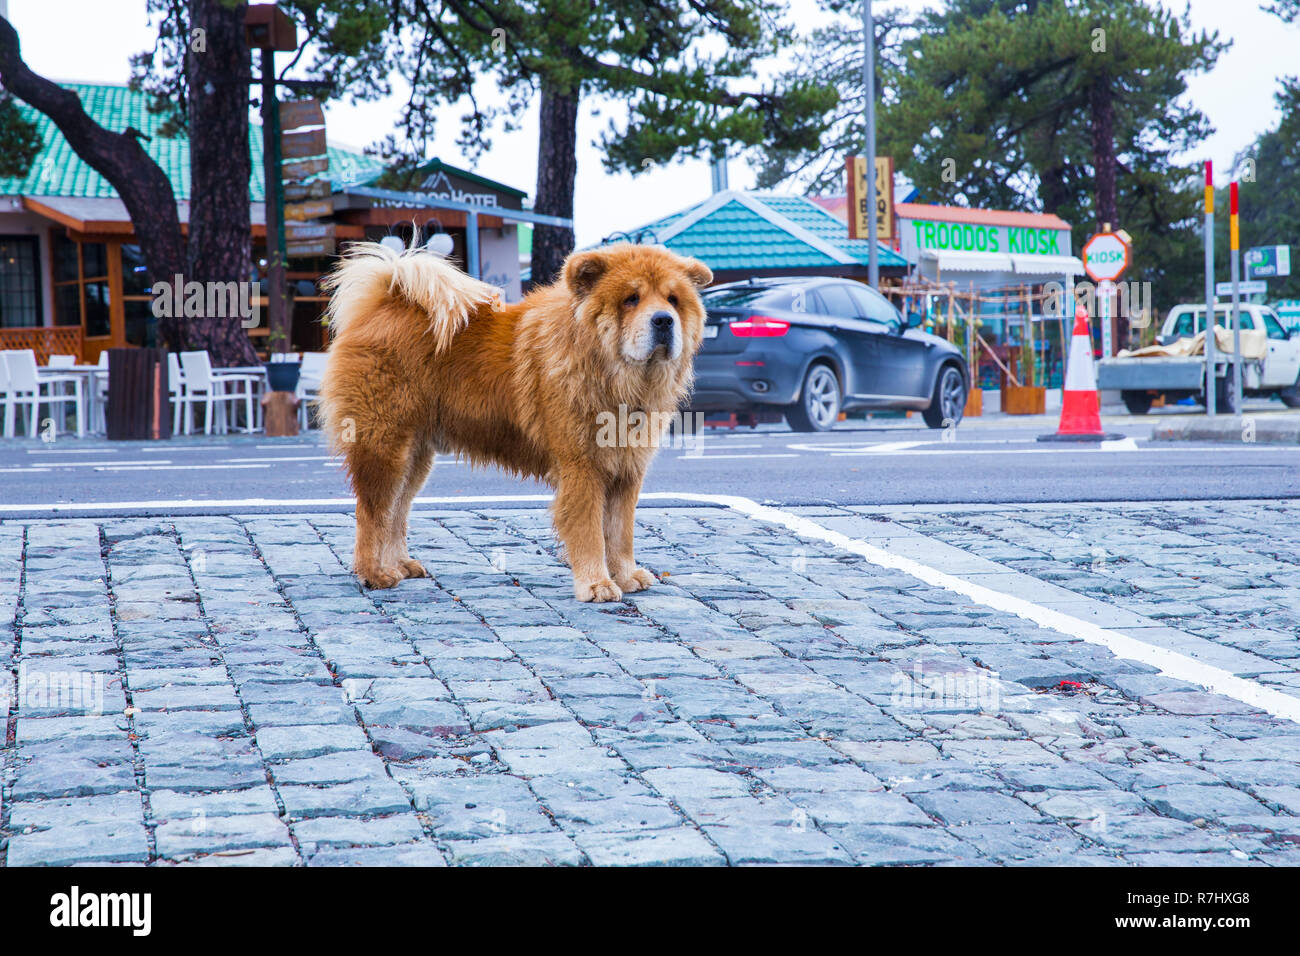 City Paphos, Cyprus. On the street chow chow dog and buildings. Travel photo 2018 december. Stock Photo